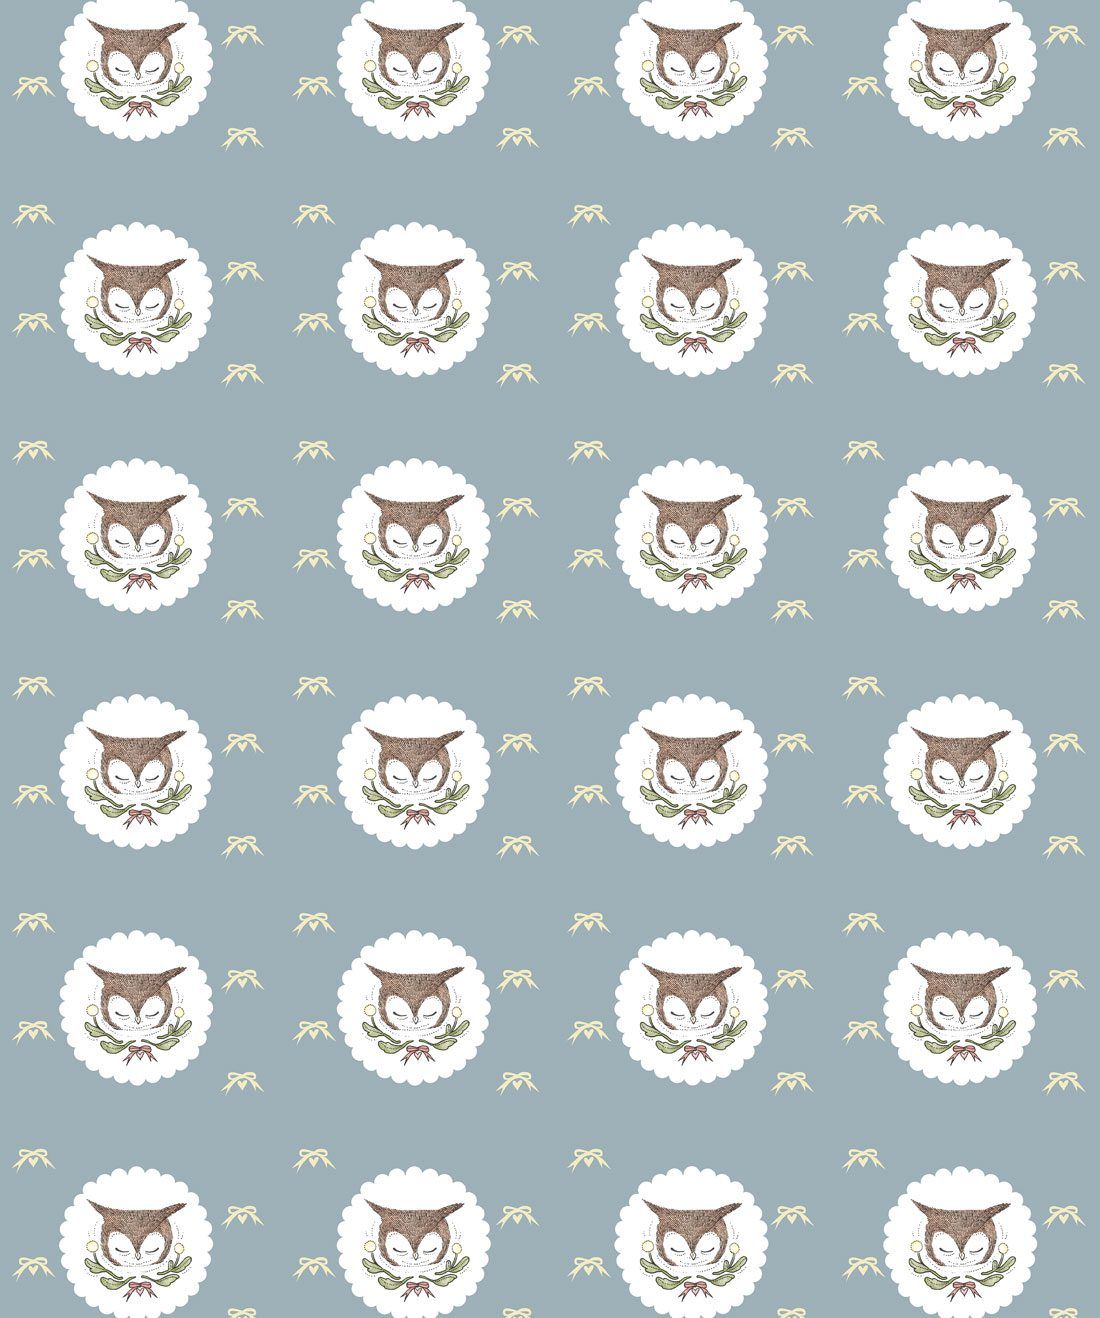 Owl Ribbons is a sophisticated kids Wallpaper